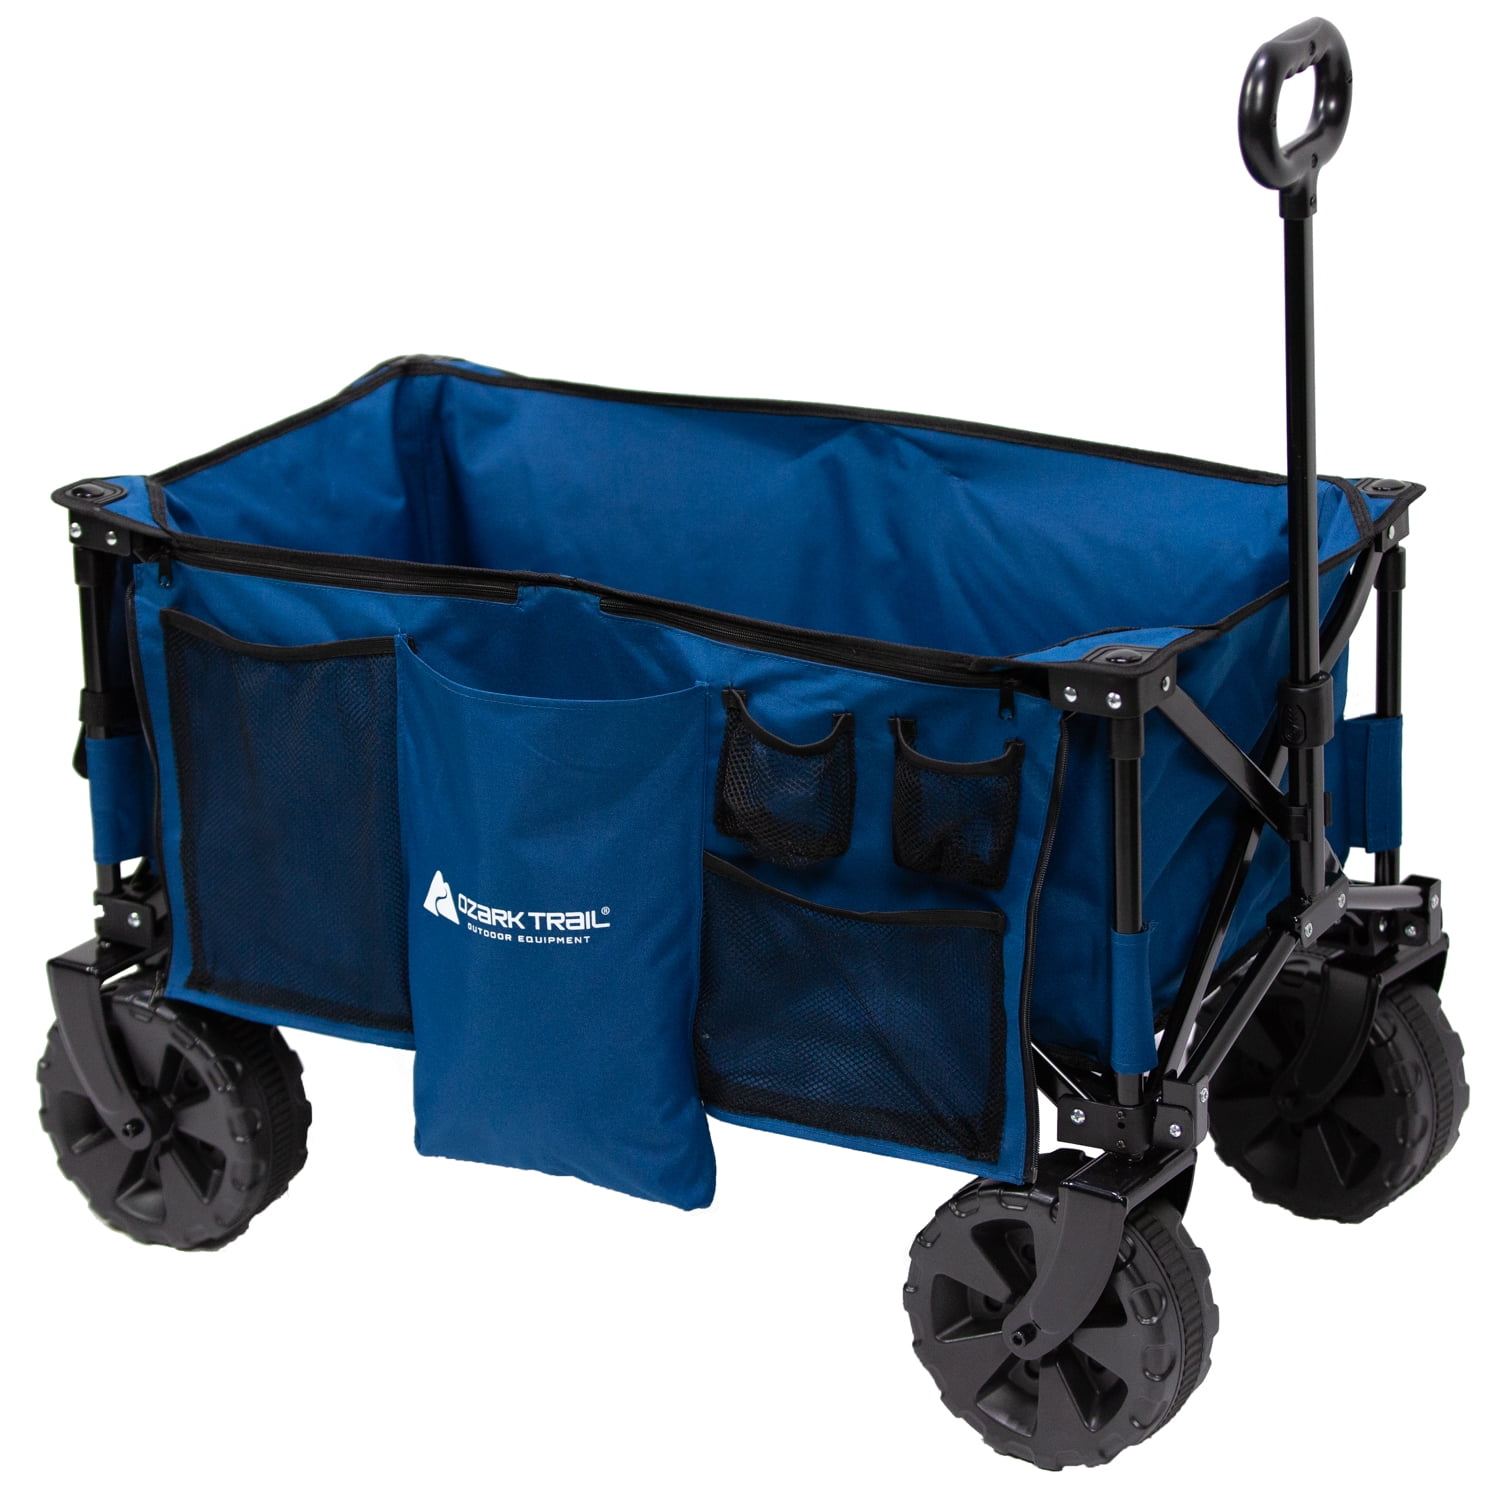 ALL TERRAIN WAGON OZARK TRAIL OUTDOOR CAMPING UTILITY GEAR With Oversized Wheel 